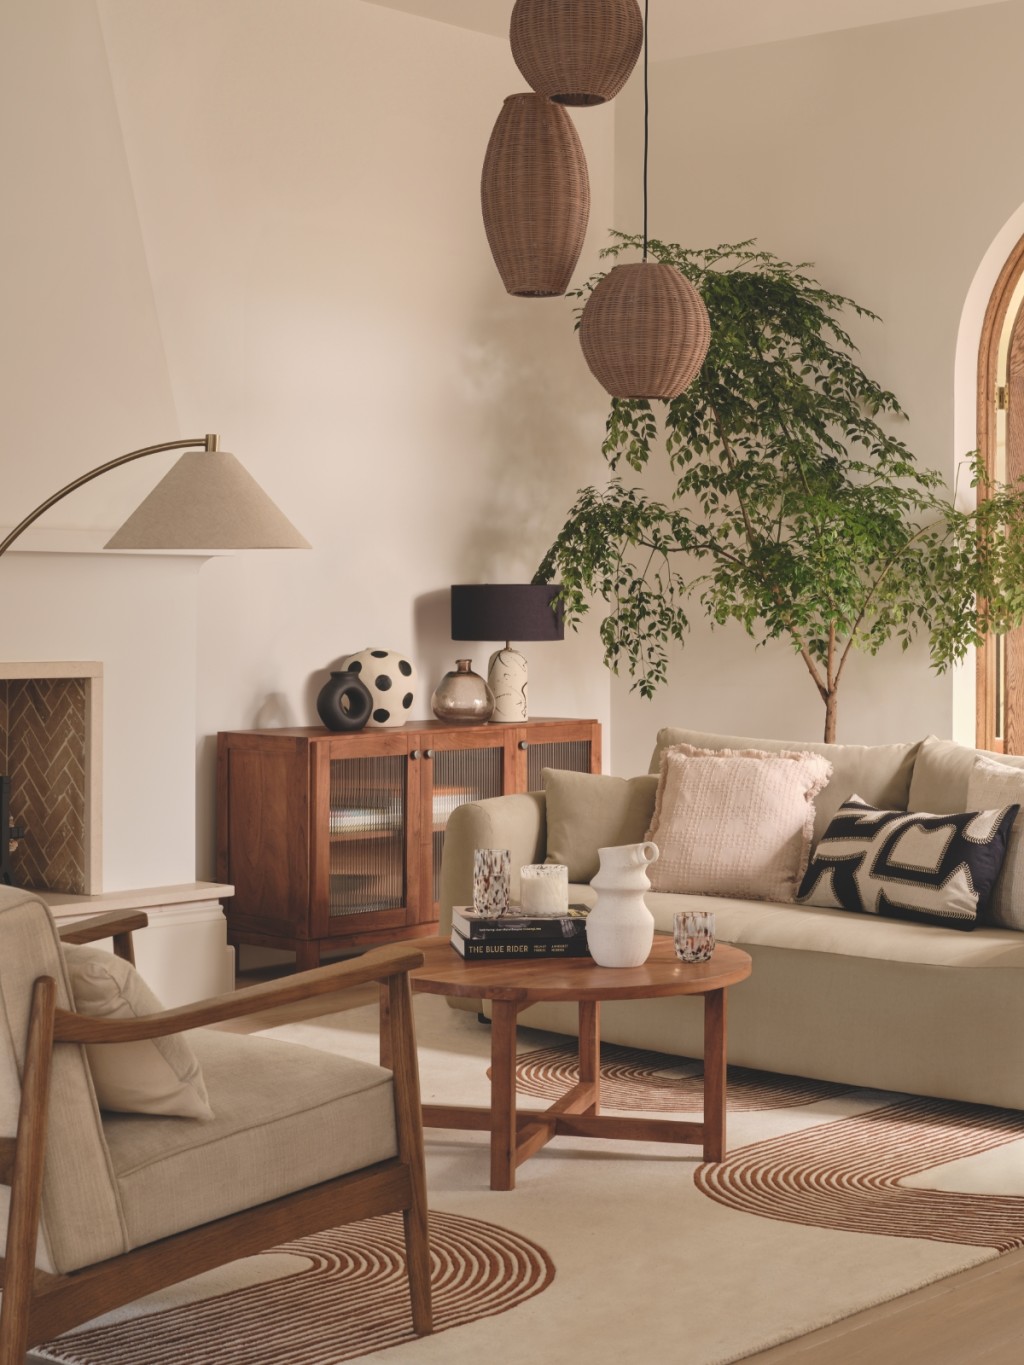 Neutrally decorated living room. Shop the Relaxed Contemporary trend